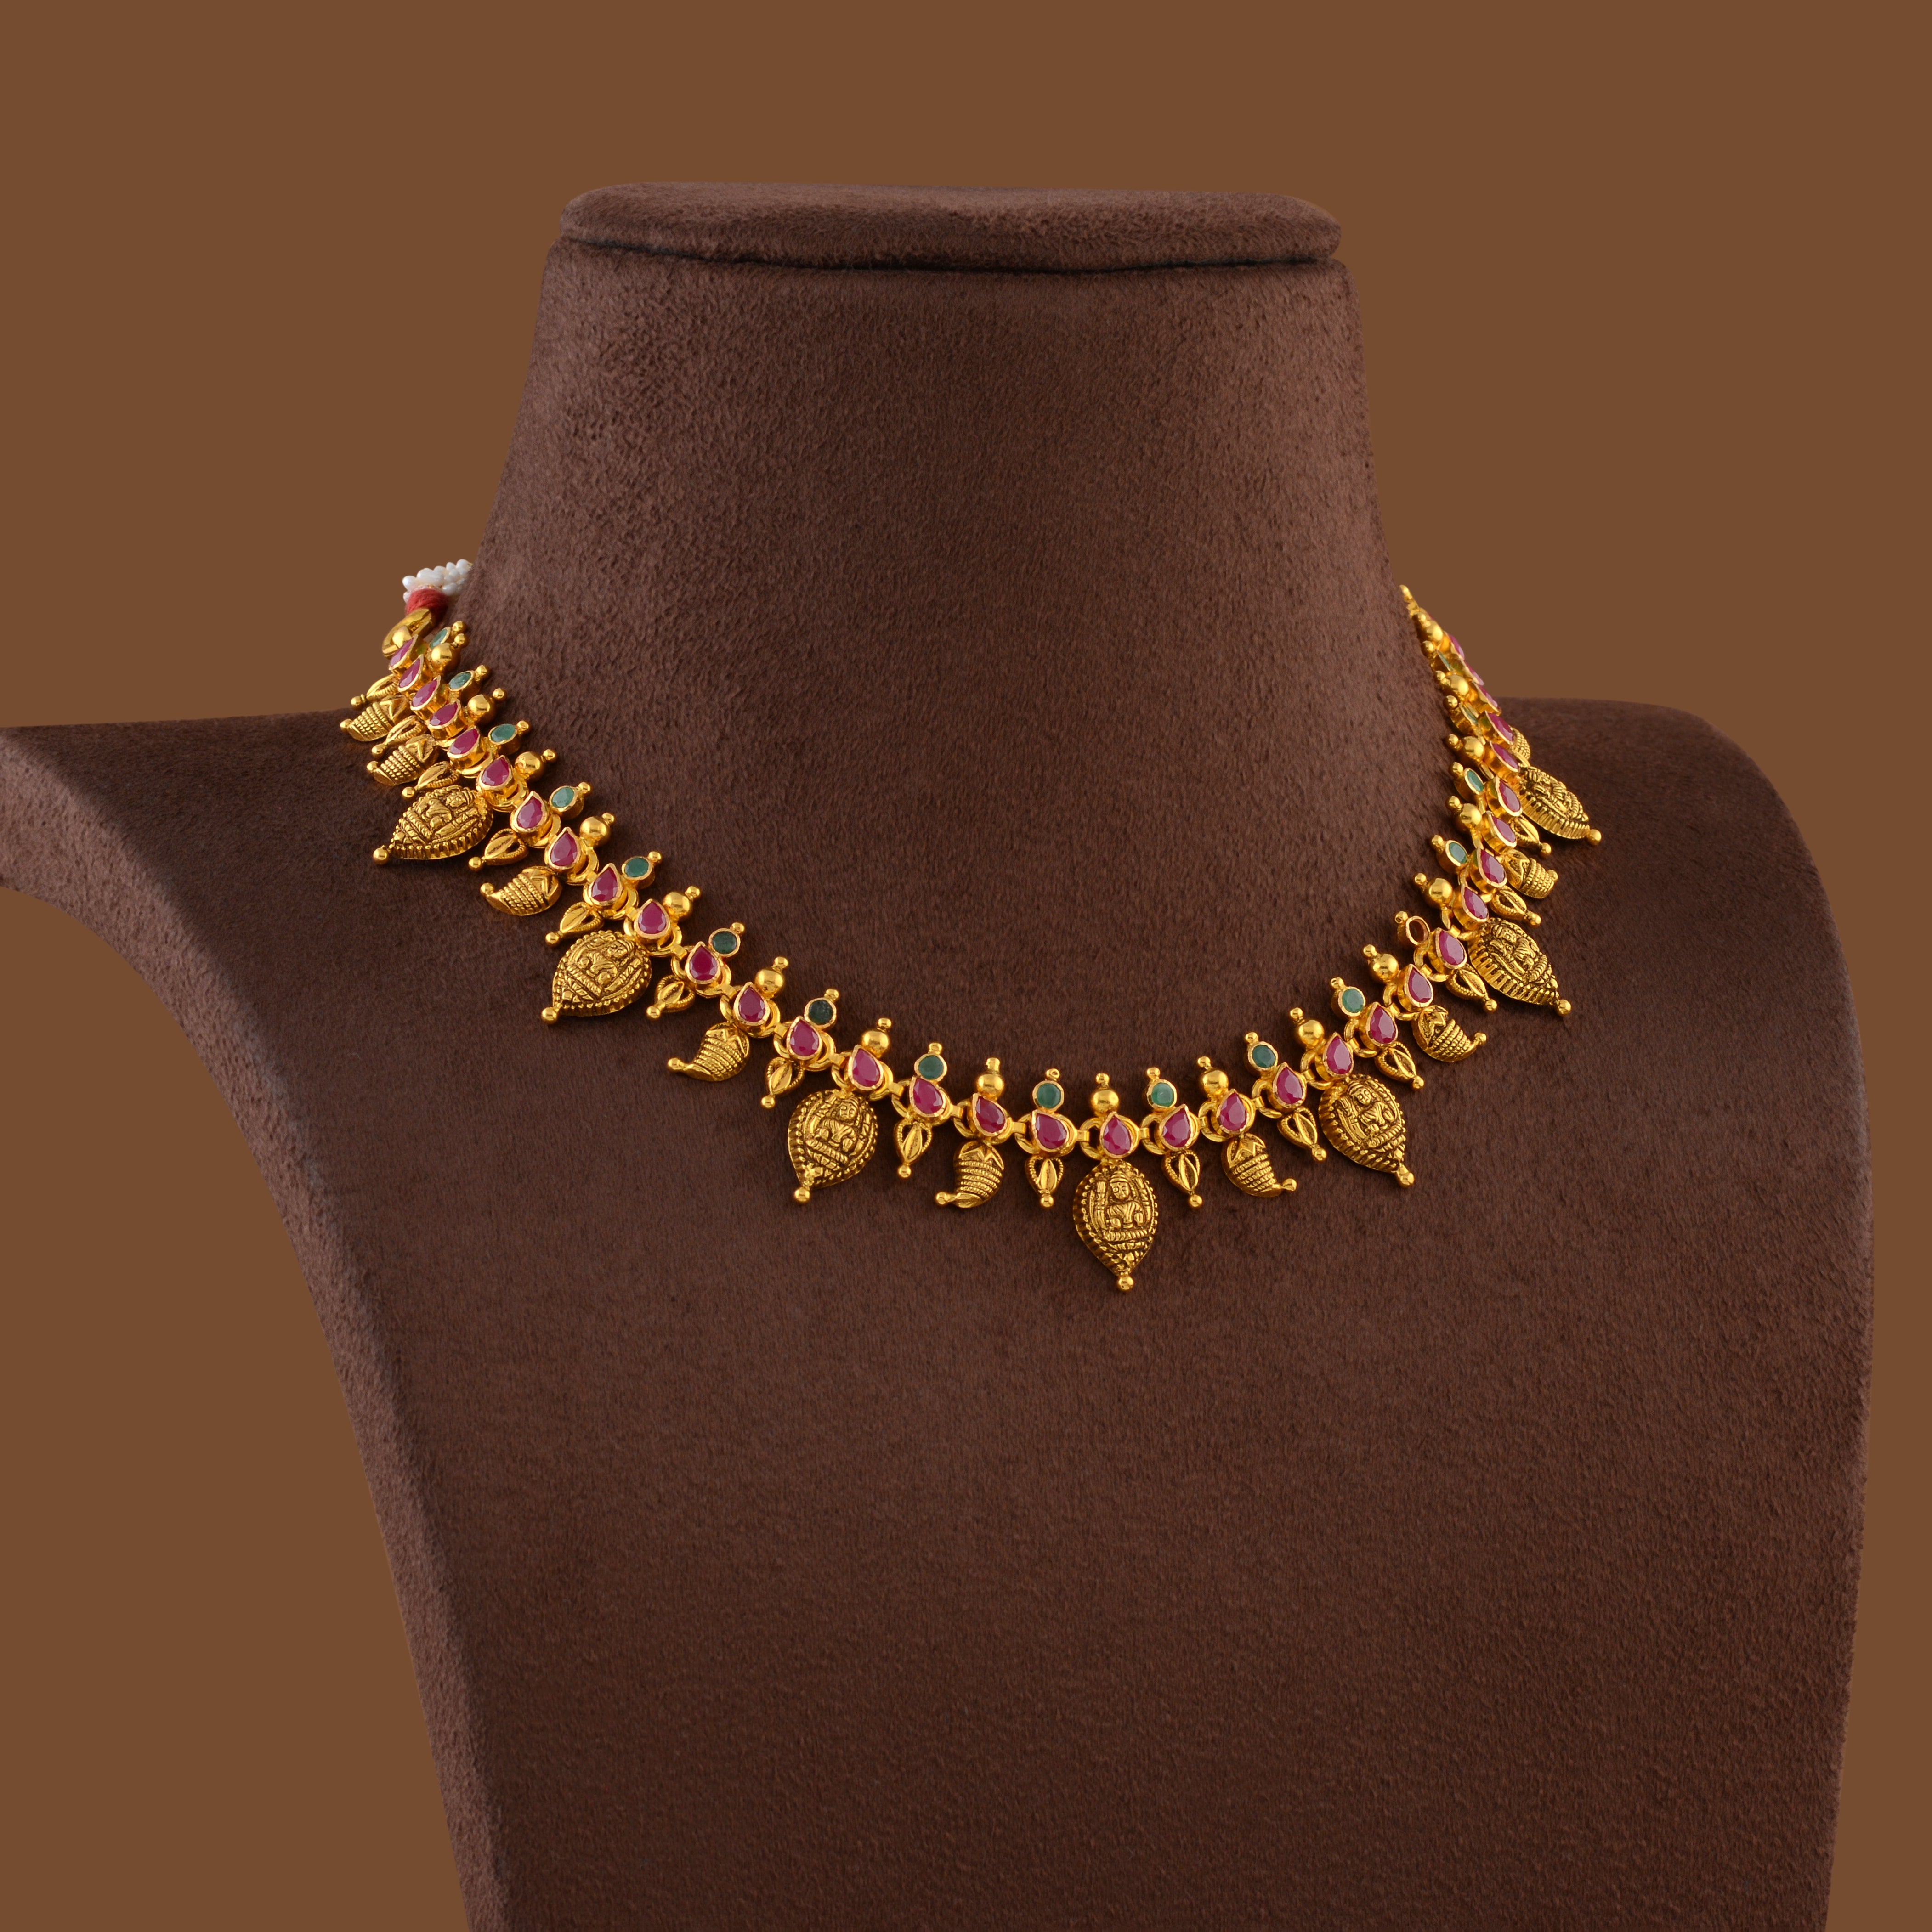 Short Gold Necklace in Laxmi And Mango Design